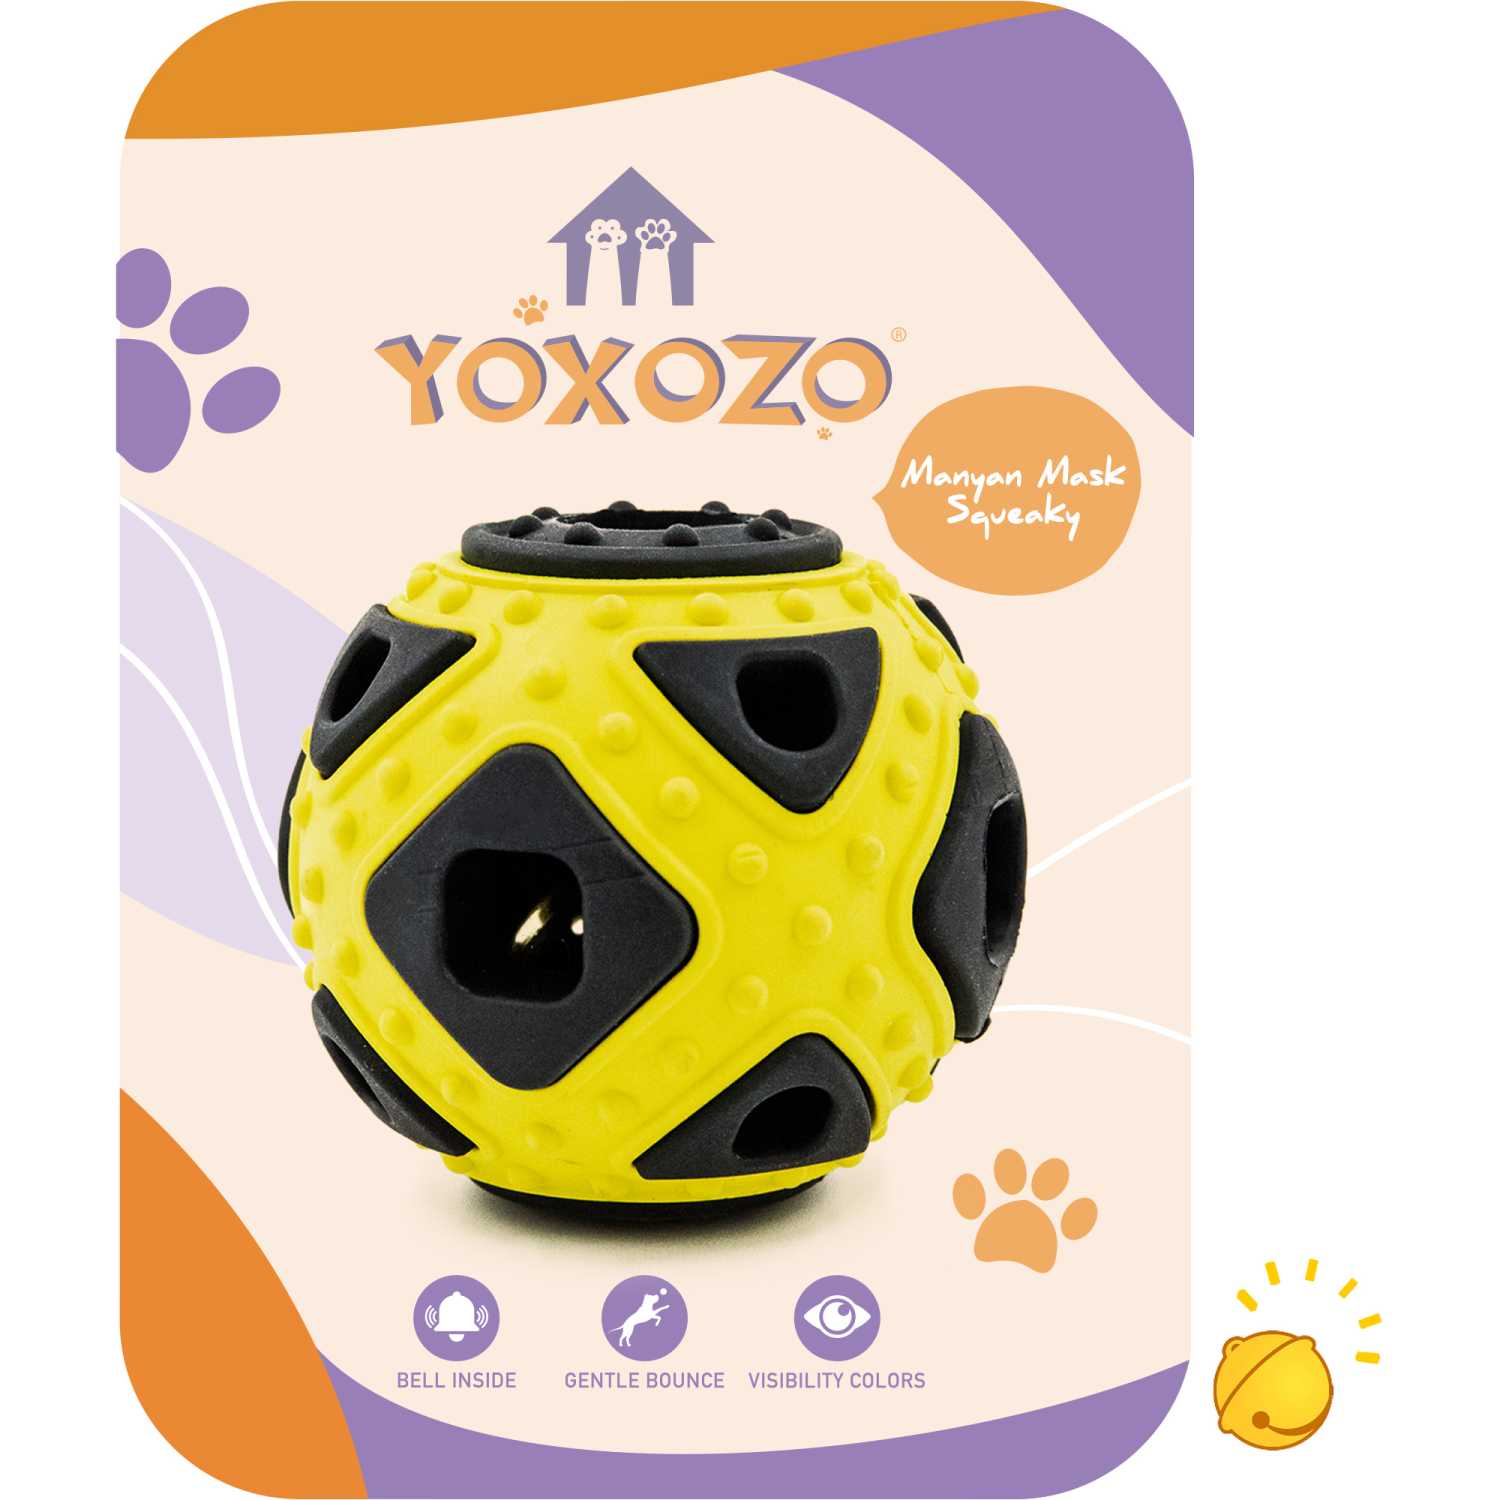 Dog Ball Toy, Jingle Bell Inside for Gift, Rubber Squeaky Toy, Interactive Smart Ball with Holes, Ideal for Puppies, Small, Medium and Blind Dogs, 2.5 Inch (Yellow Black)